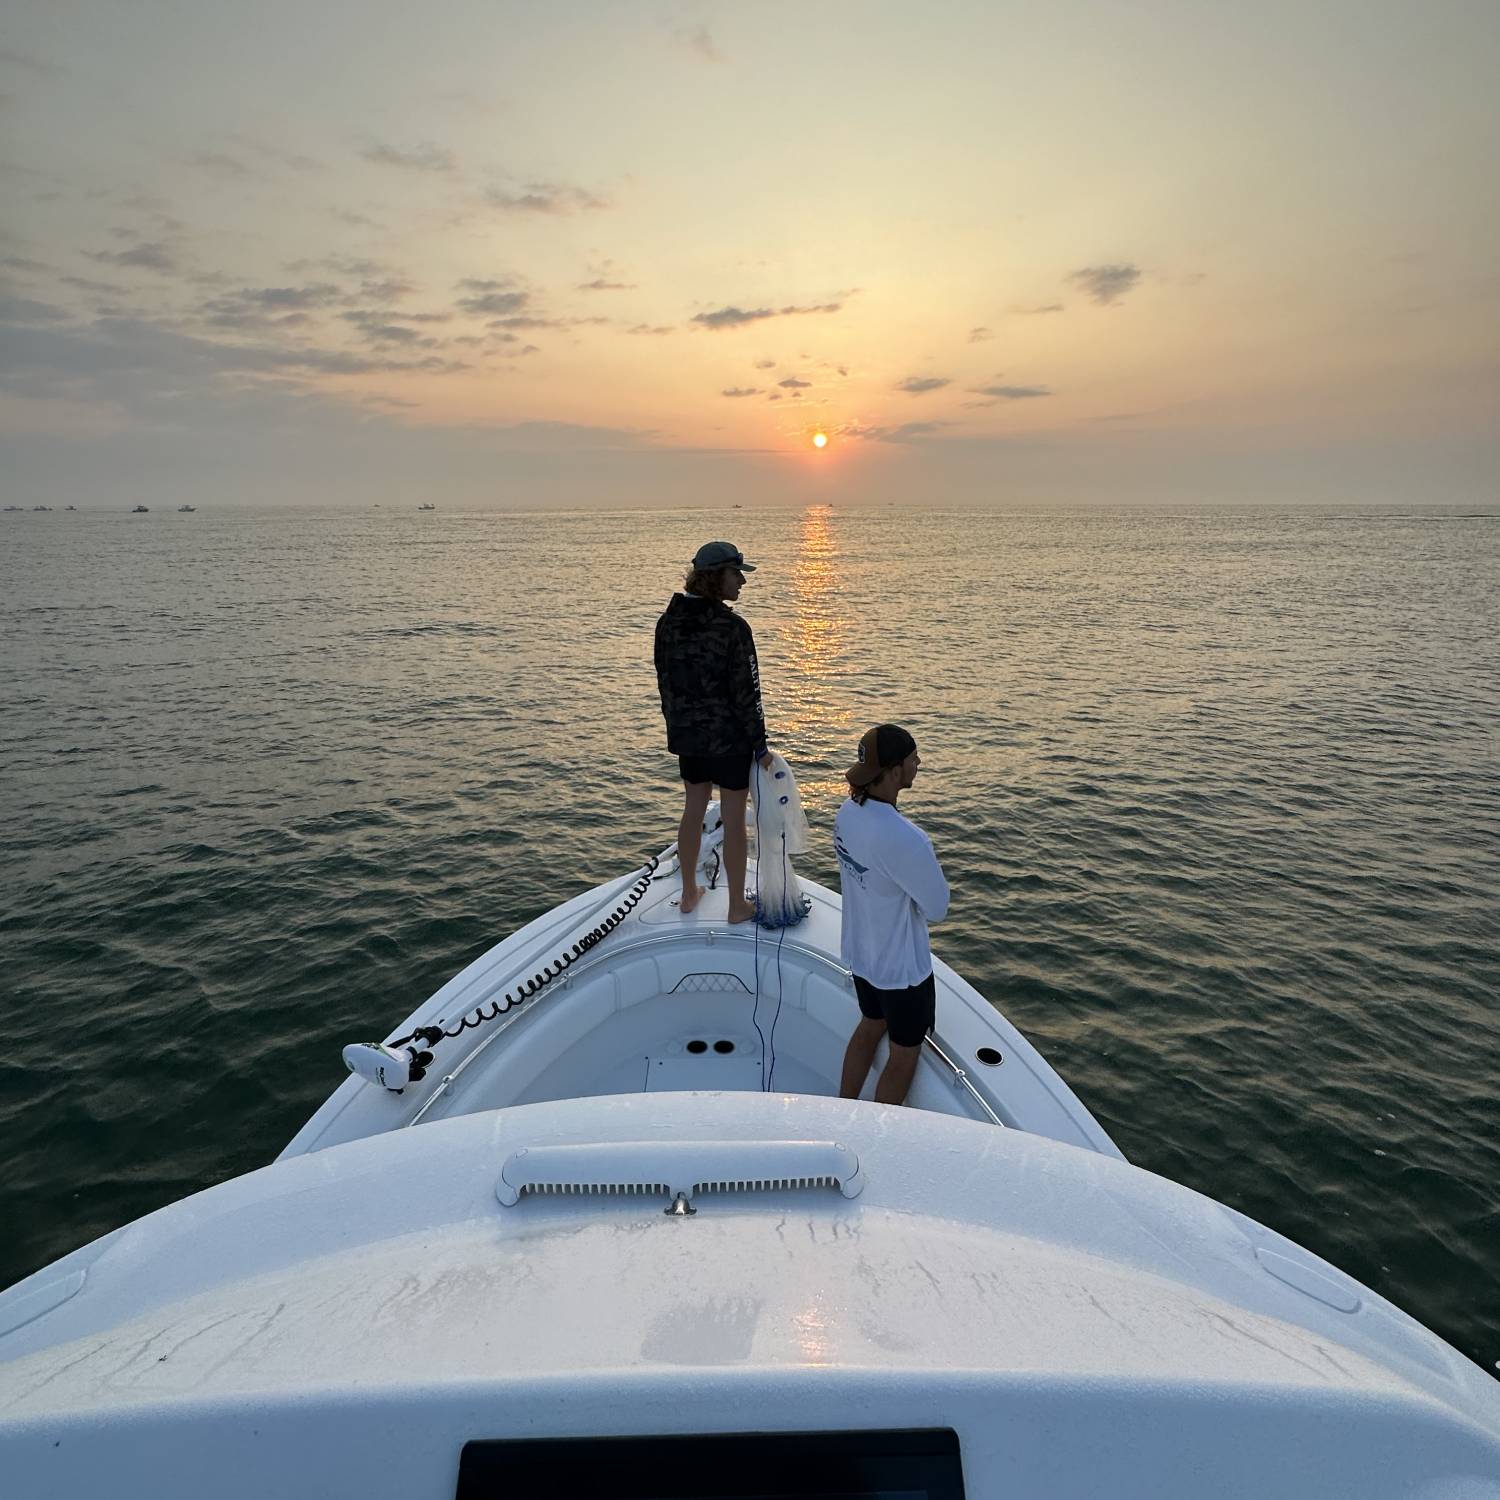 Title: Looking for bait - On board their Sportsman Open 282 Center Console - Location: St Augustine, FL. Participating in the Photo Contest #SportsmanJune2023